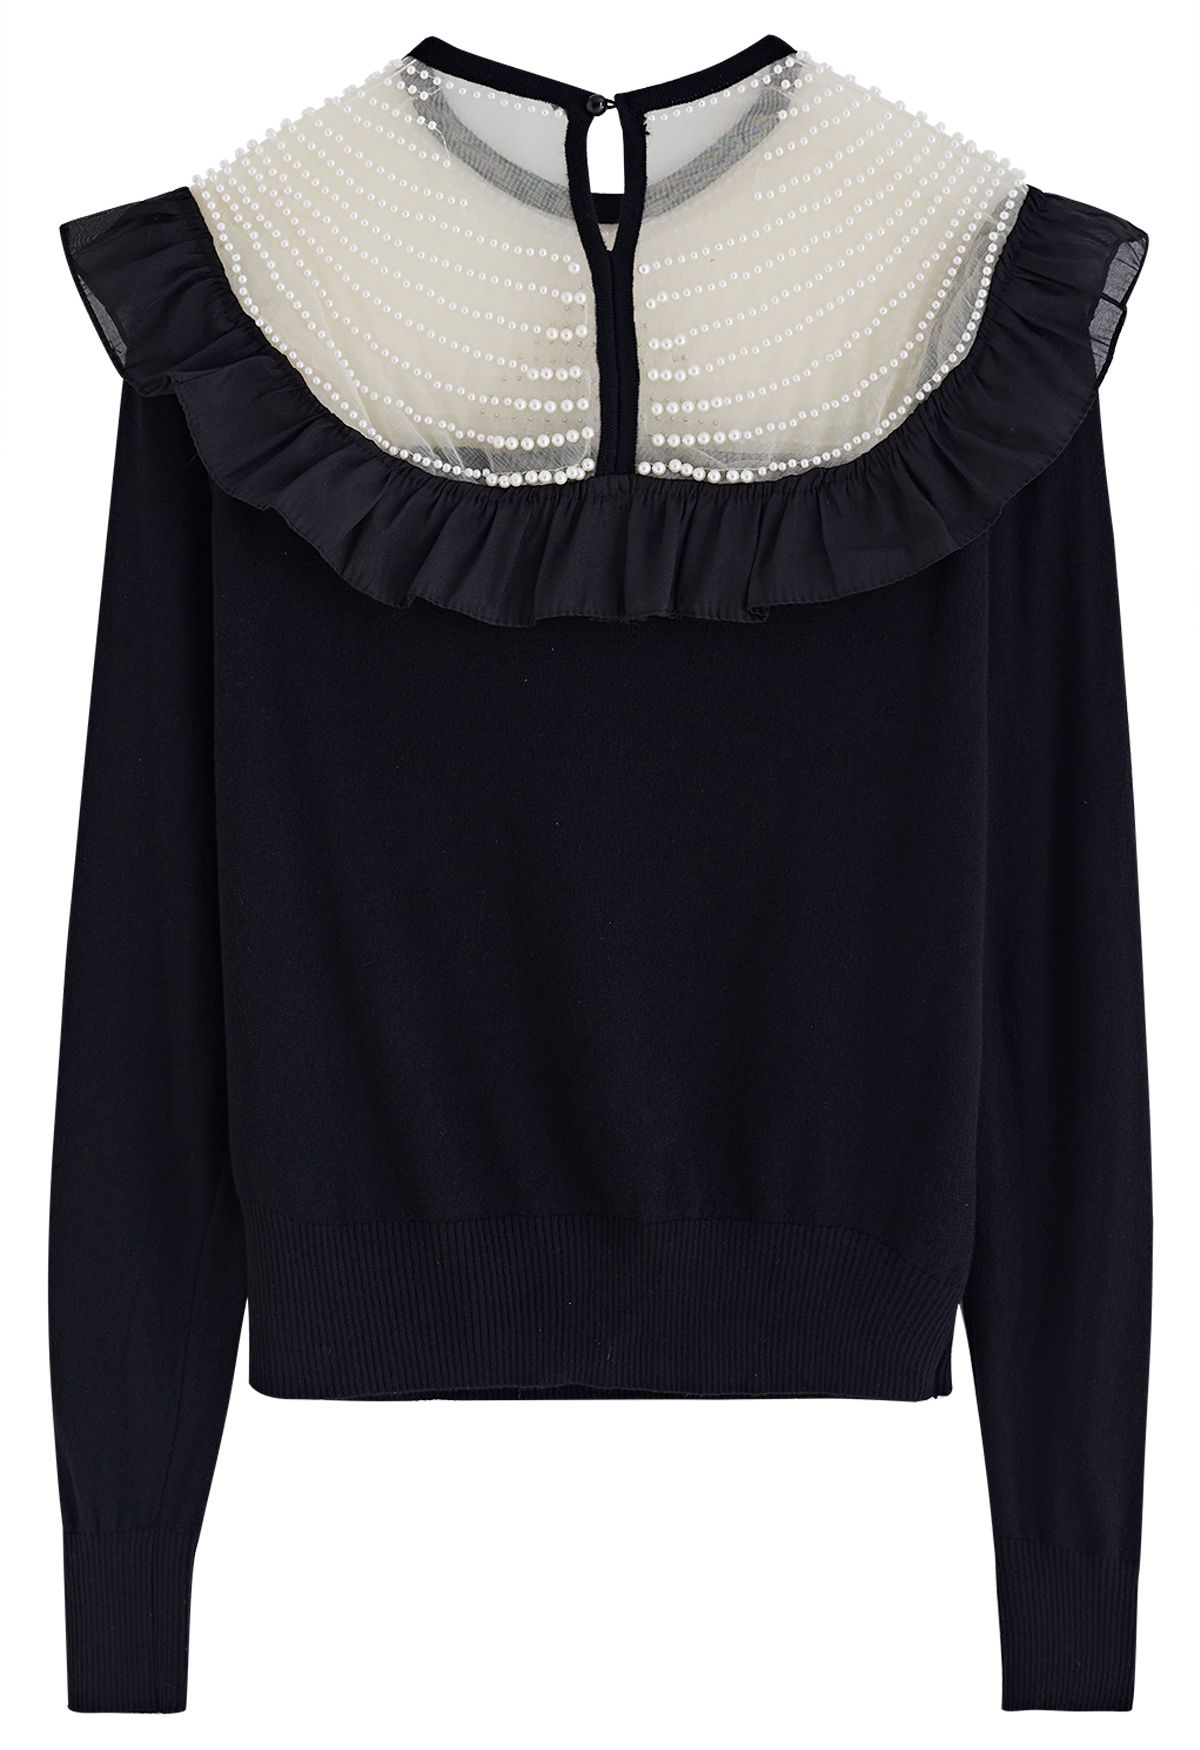 Pearly Neck Ruffle Knit Top in Black